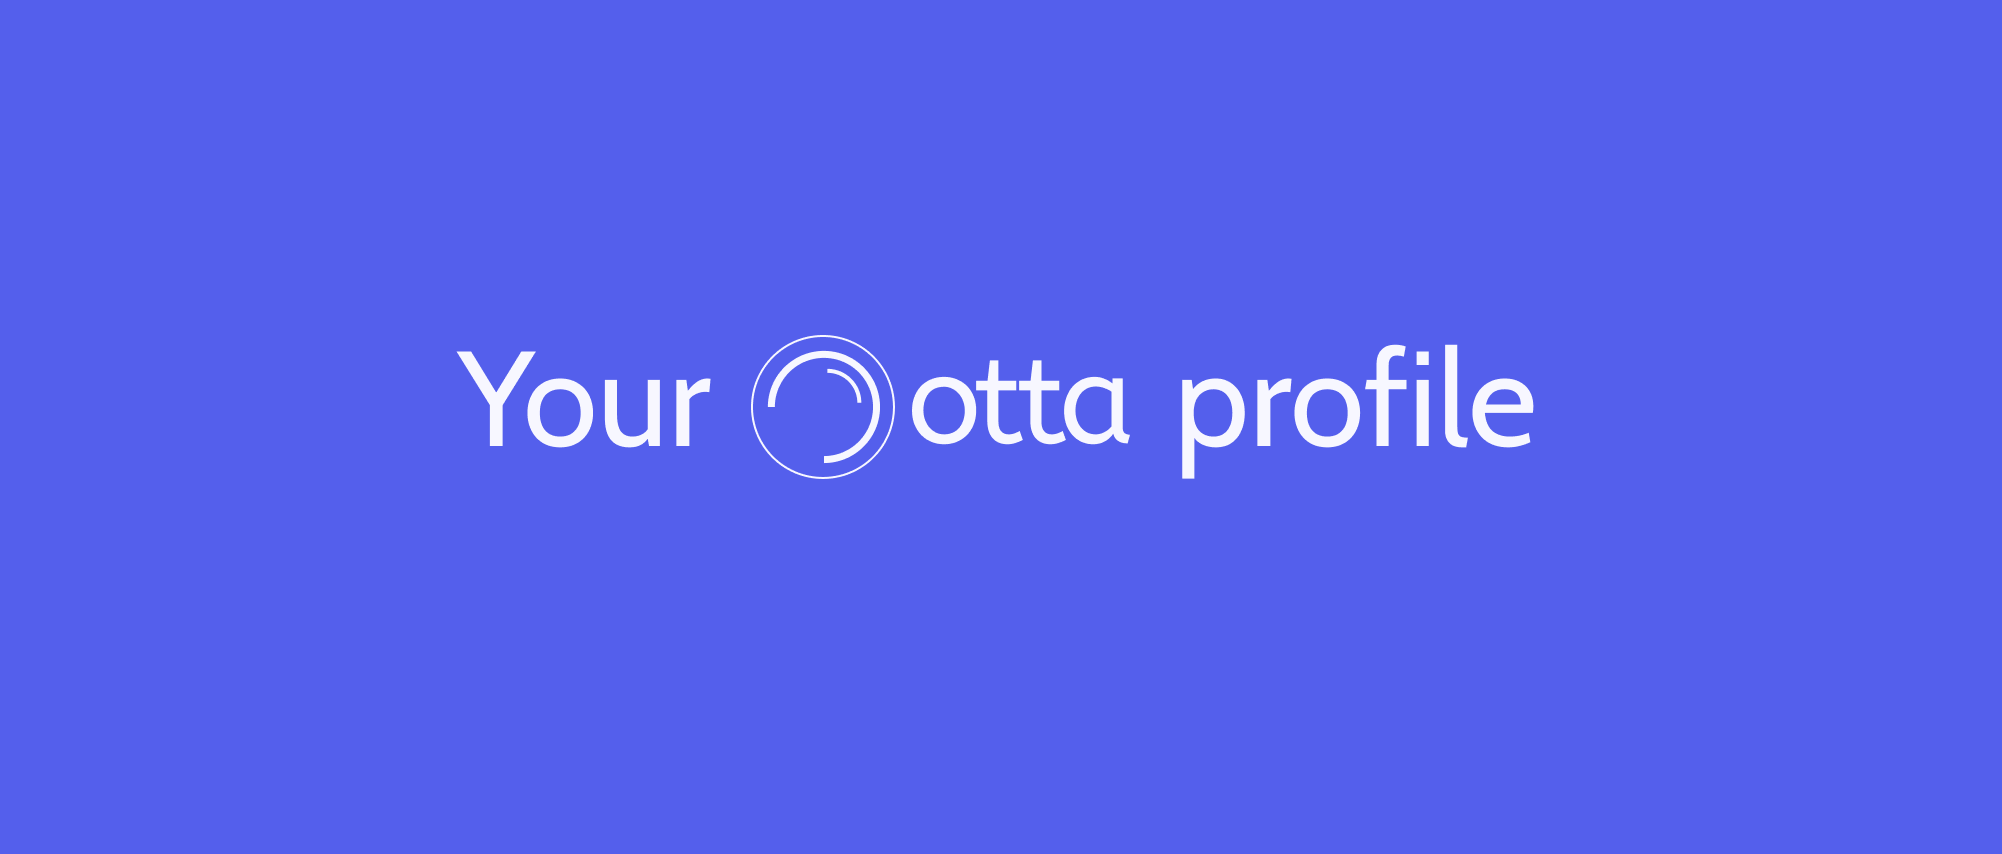 How to write a strong Otta profile